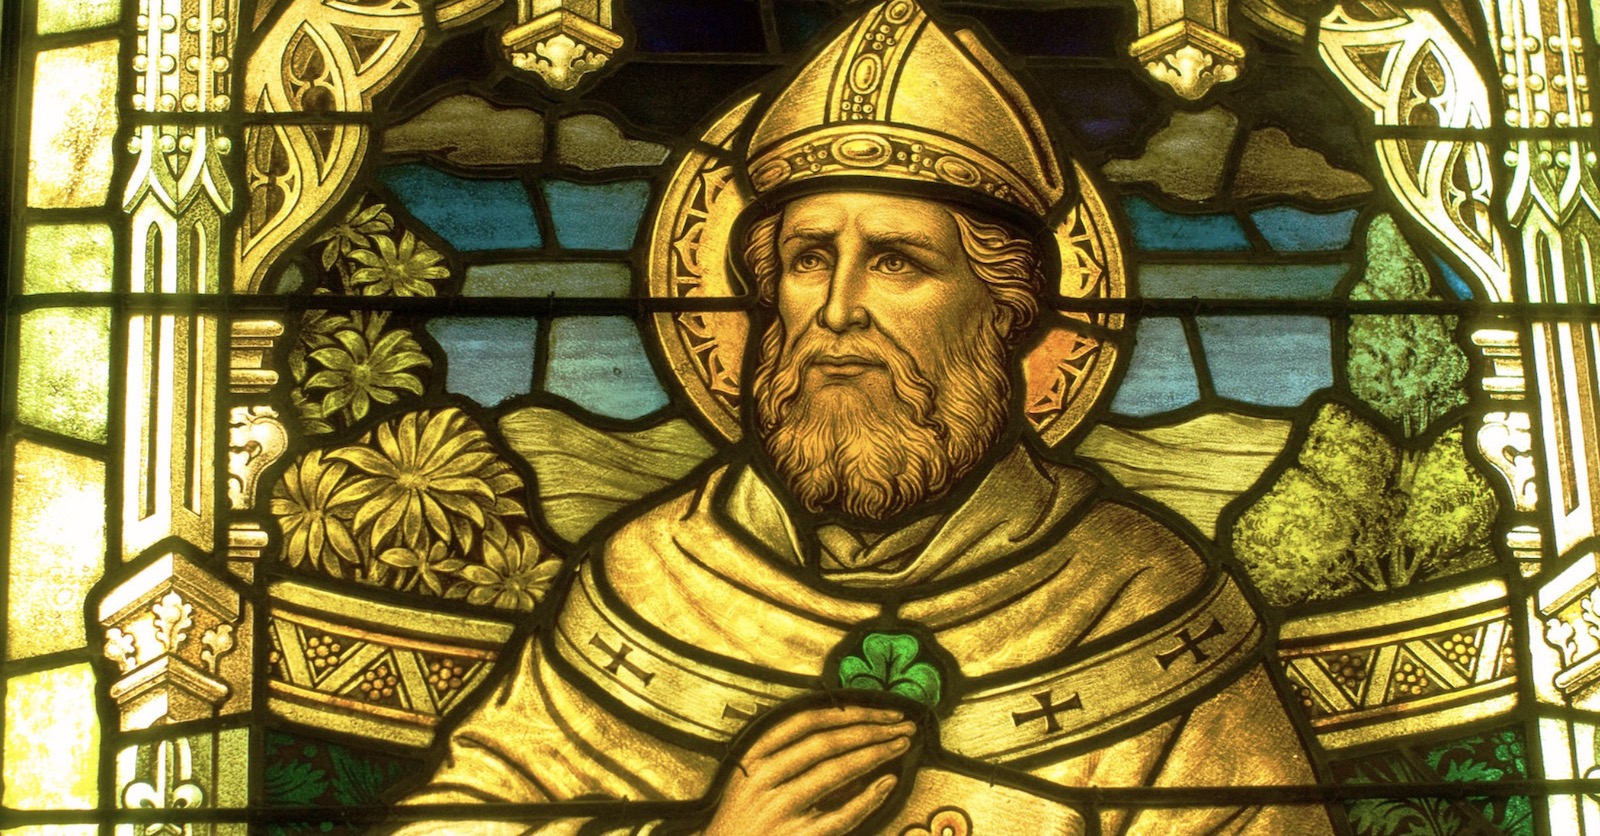 St. Patrick with a shamrock in a stained glass window at the Smith Museum of Stained Glass Windows, Chicago.